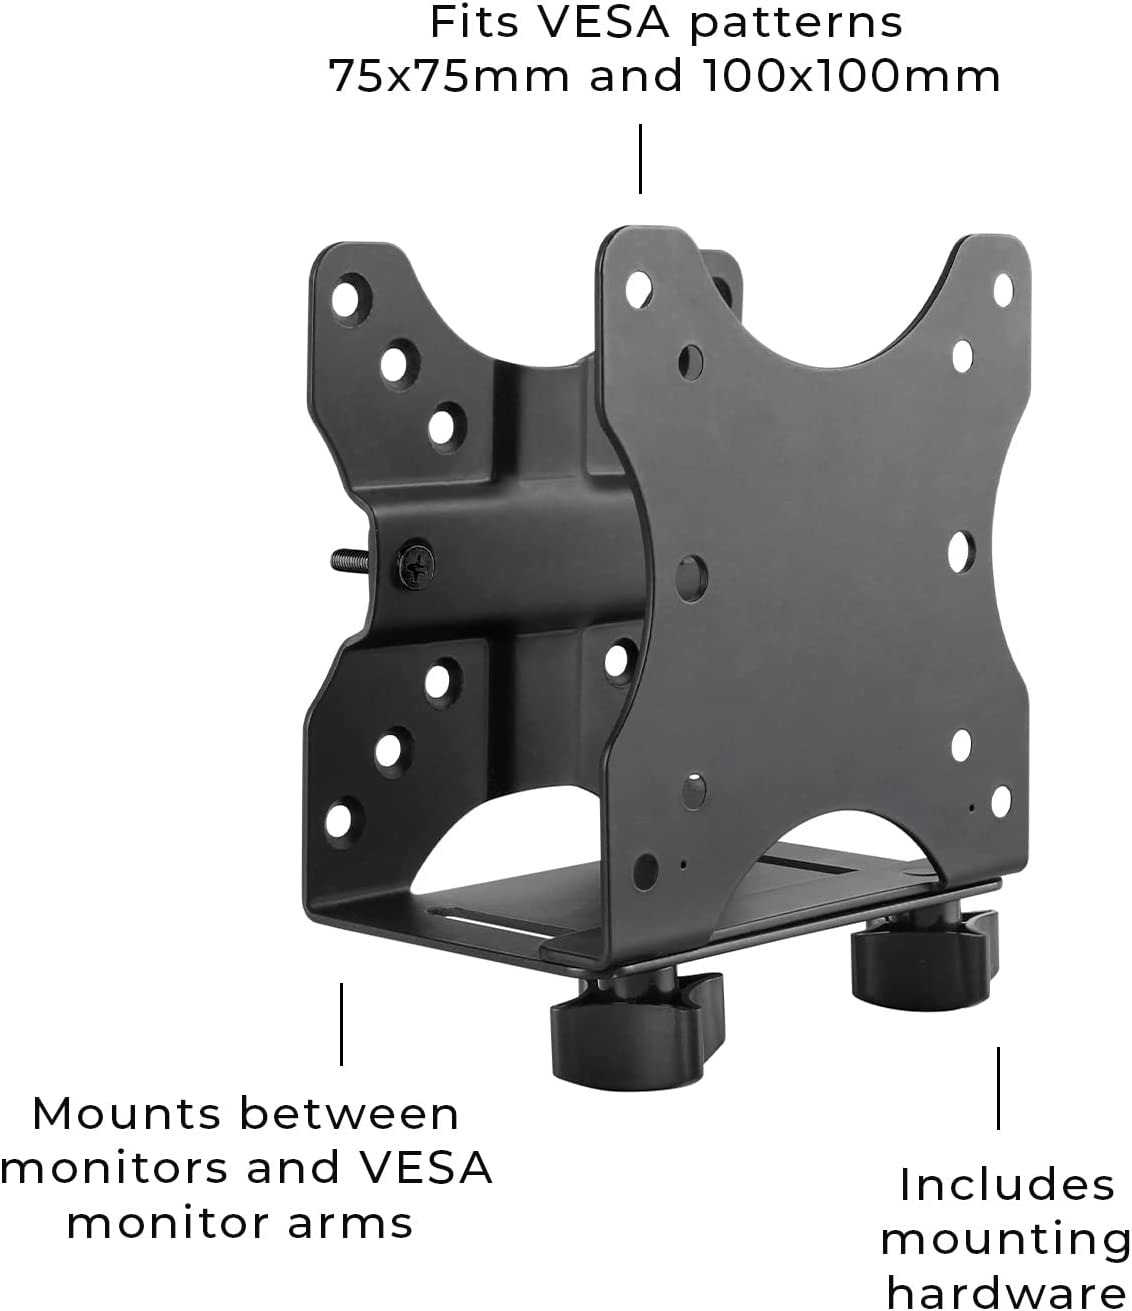 Thin Client Mount Bracket | Mount a Mini PC or Computer to a VESA Monitor Arm